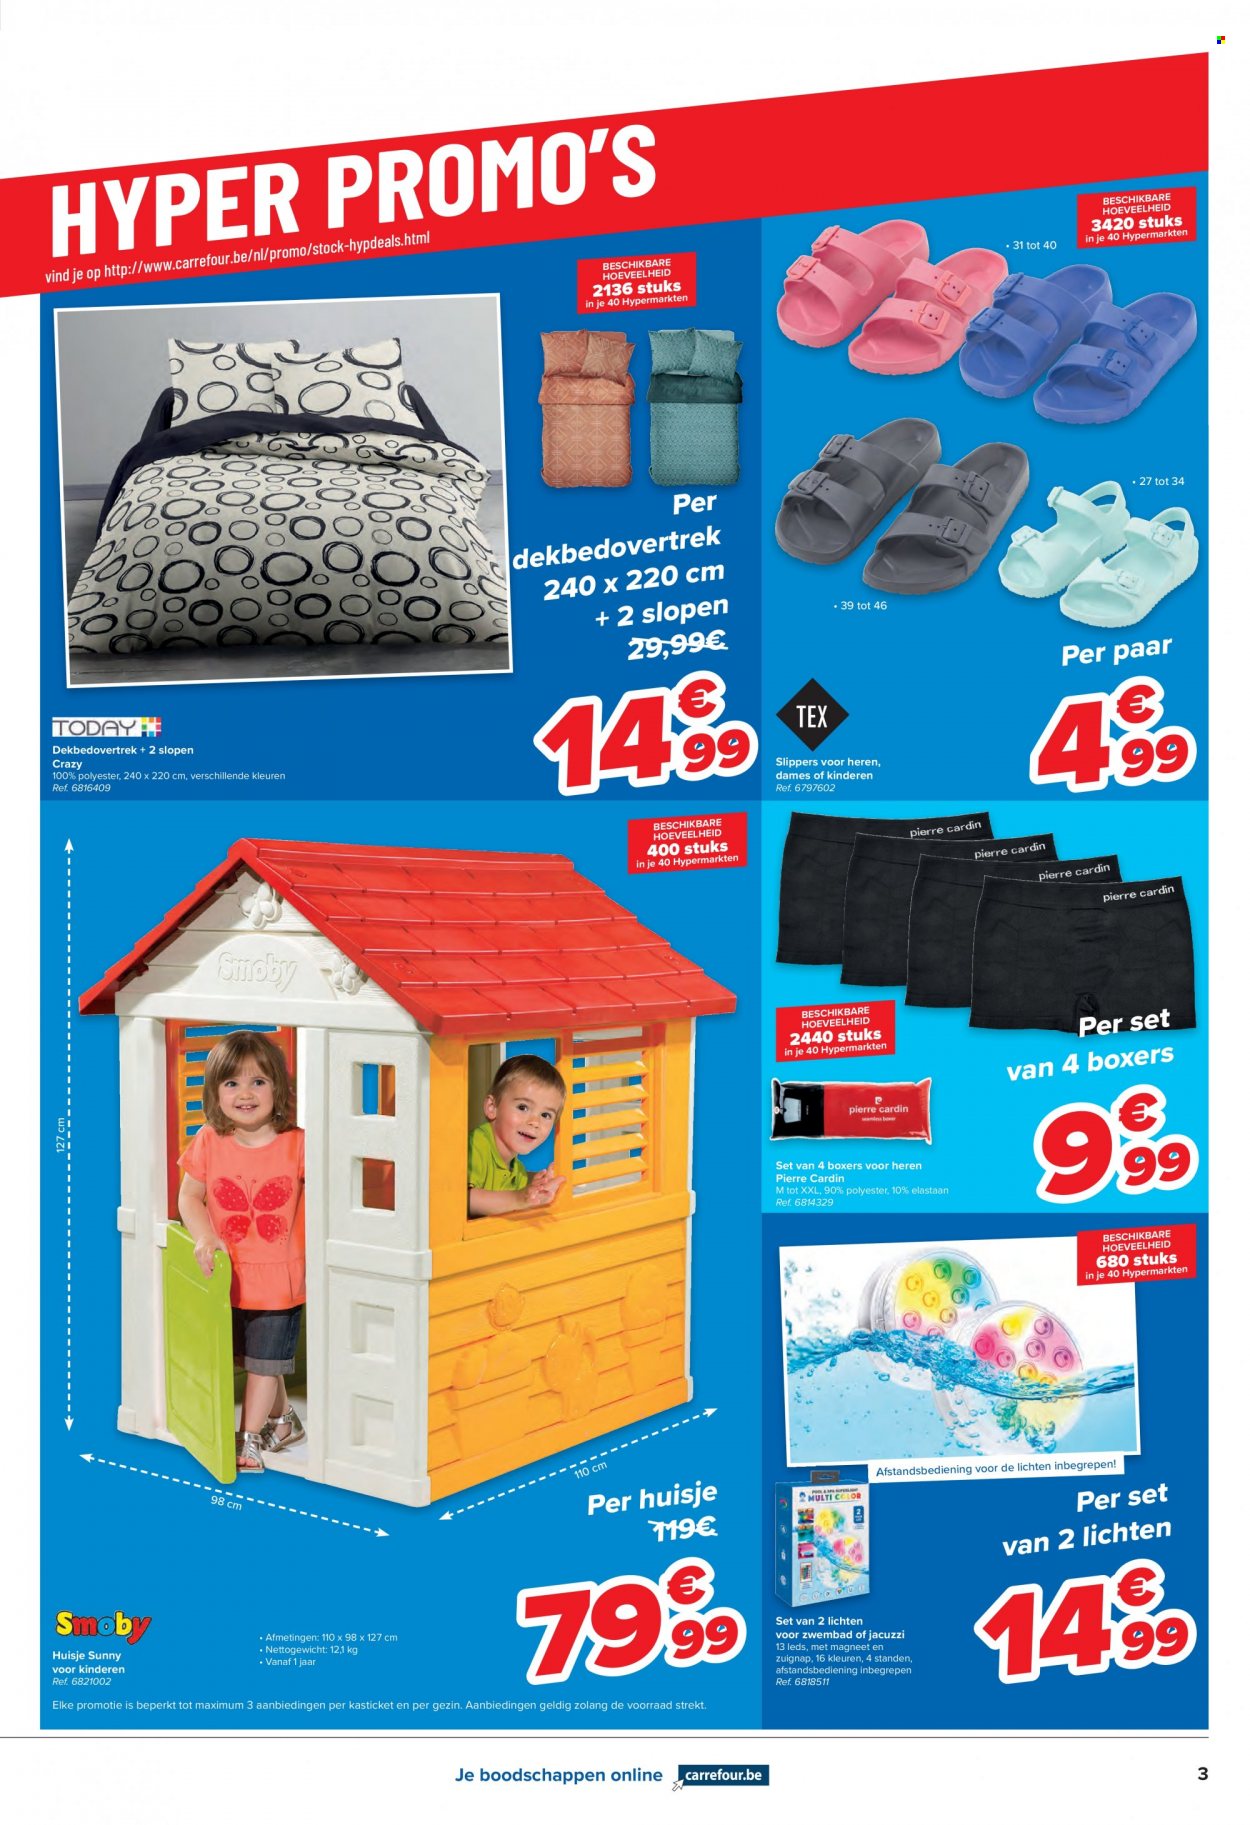 Catalogue Carrefour hypermarkt - 18.5.2022 - 23.5.2022. Page 3.